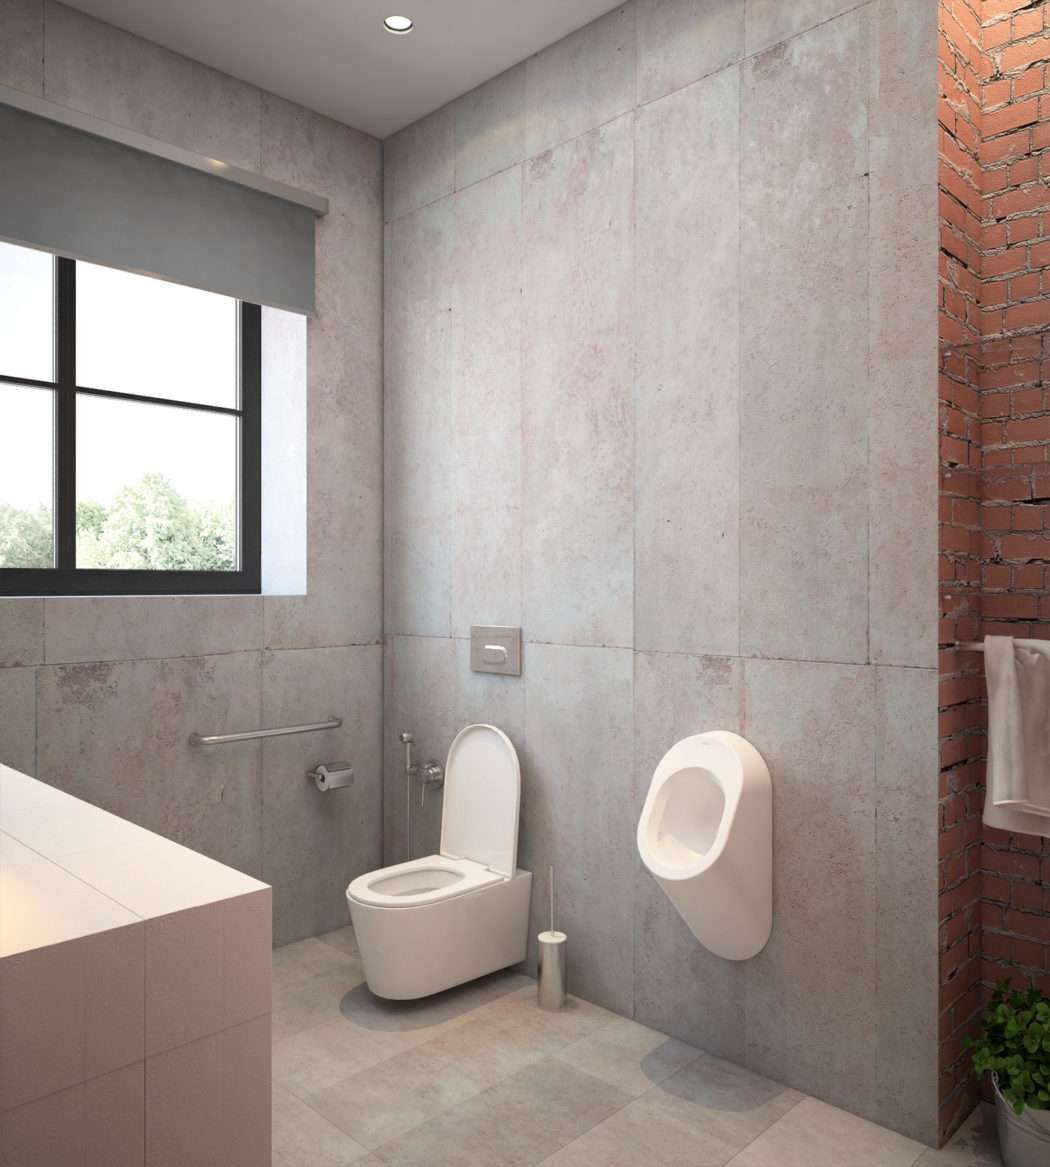 Raw concrete walls with brick ones can be seen in this part of the bathroom